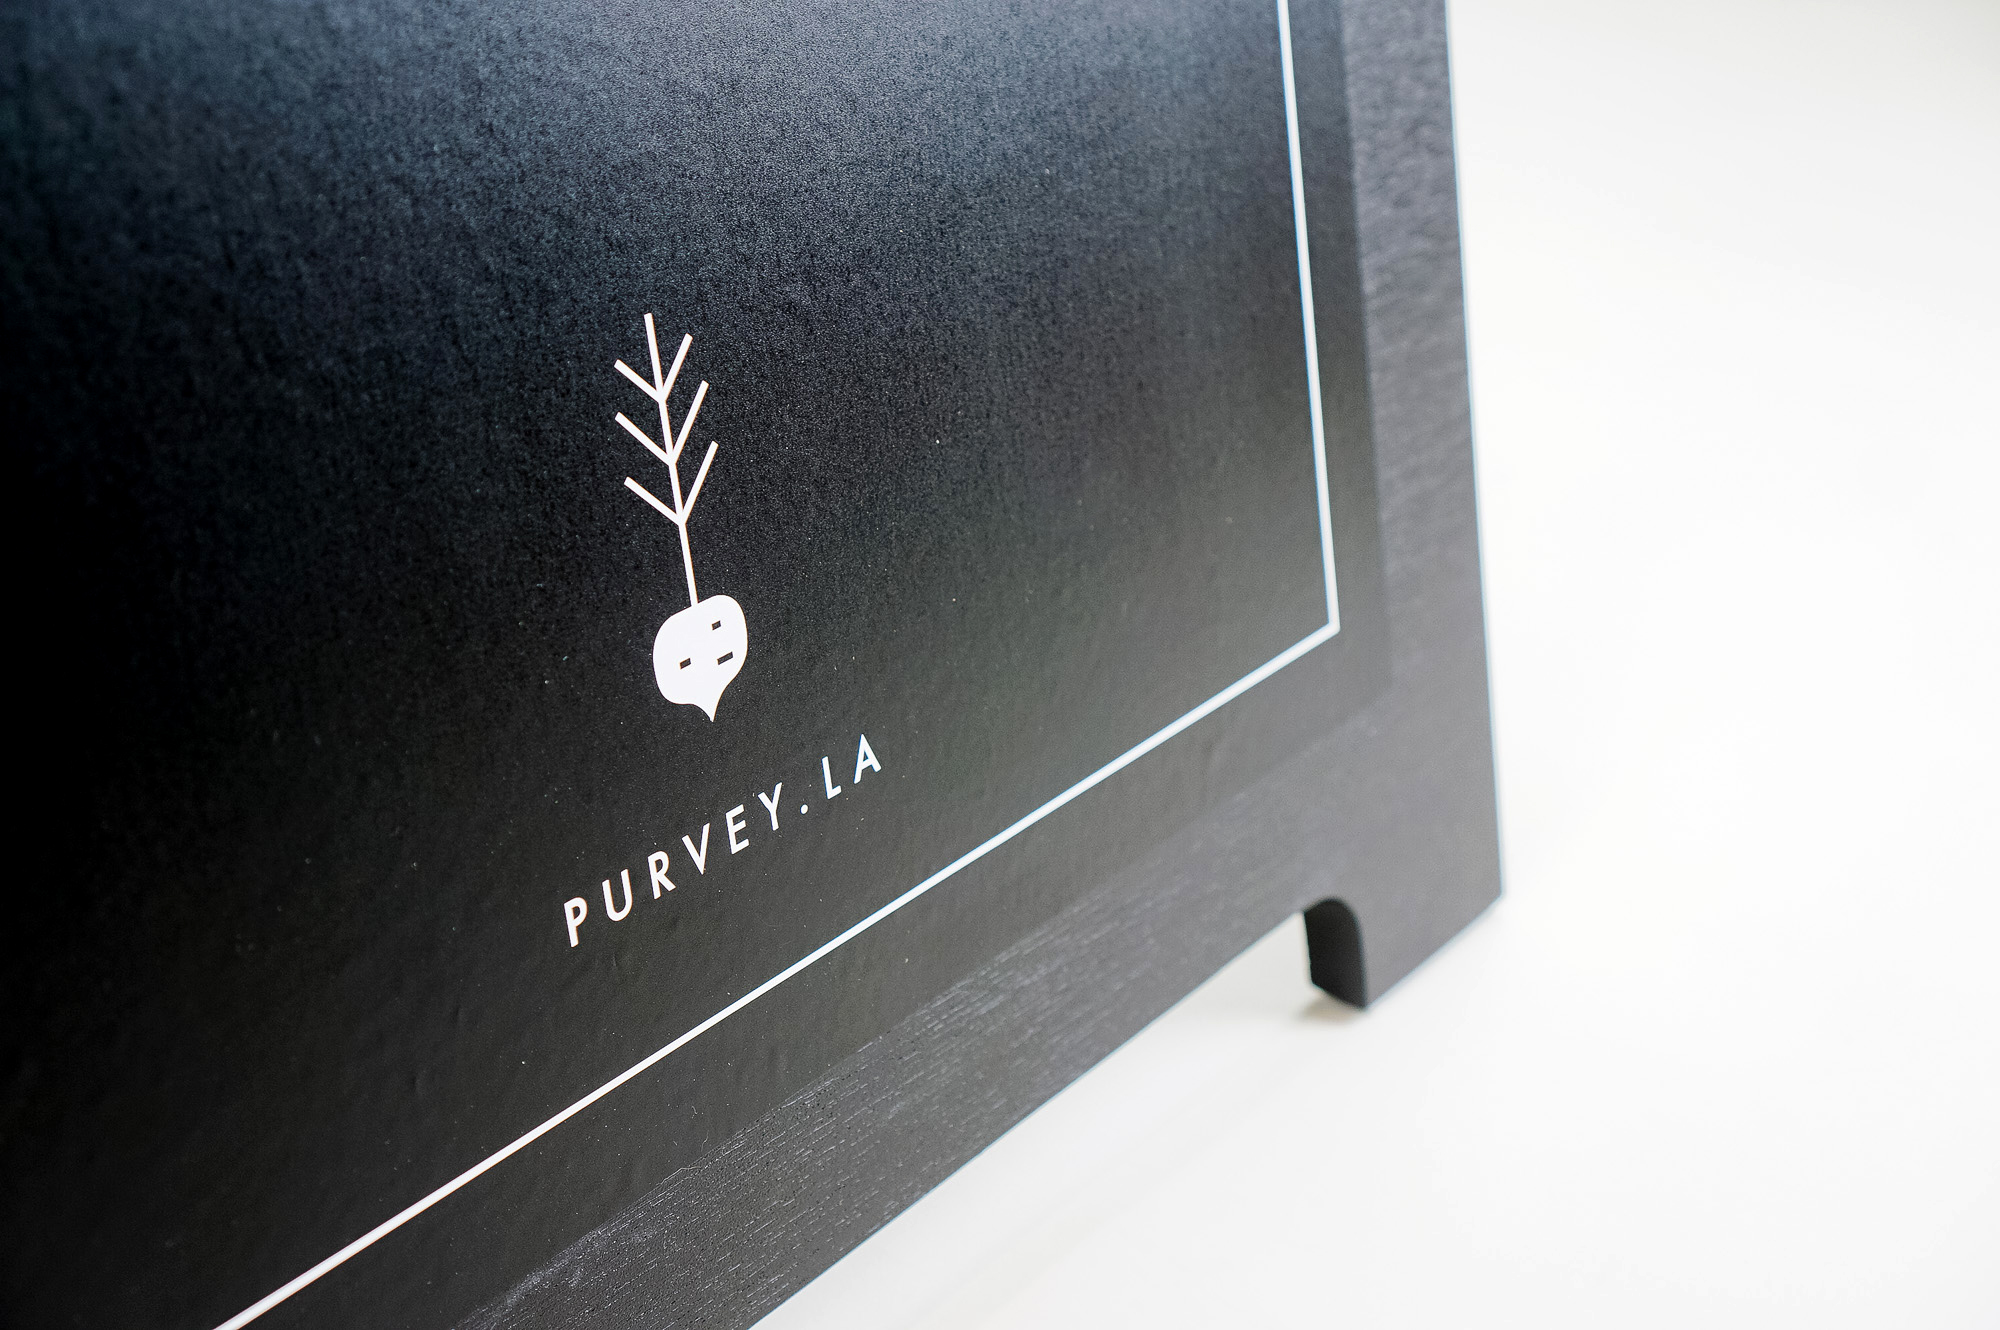 All black modern chalkboard sidewalk/farmer's market a-frame sign for Purvey, a Los Angeles based business delivering ready-to-eat, family-style meals to offices and families.